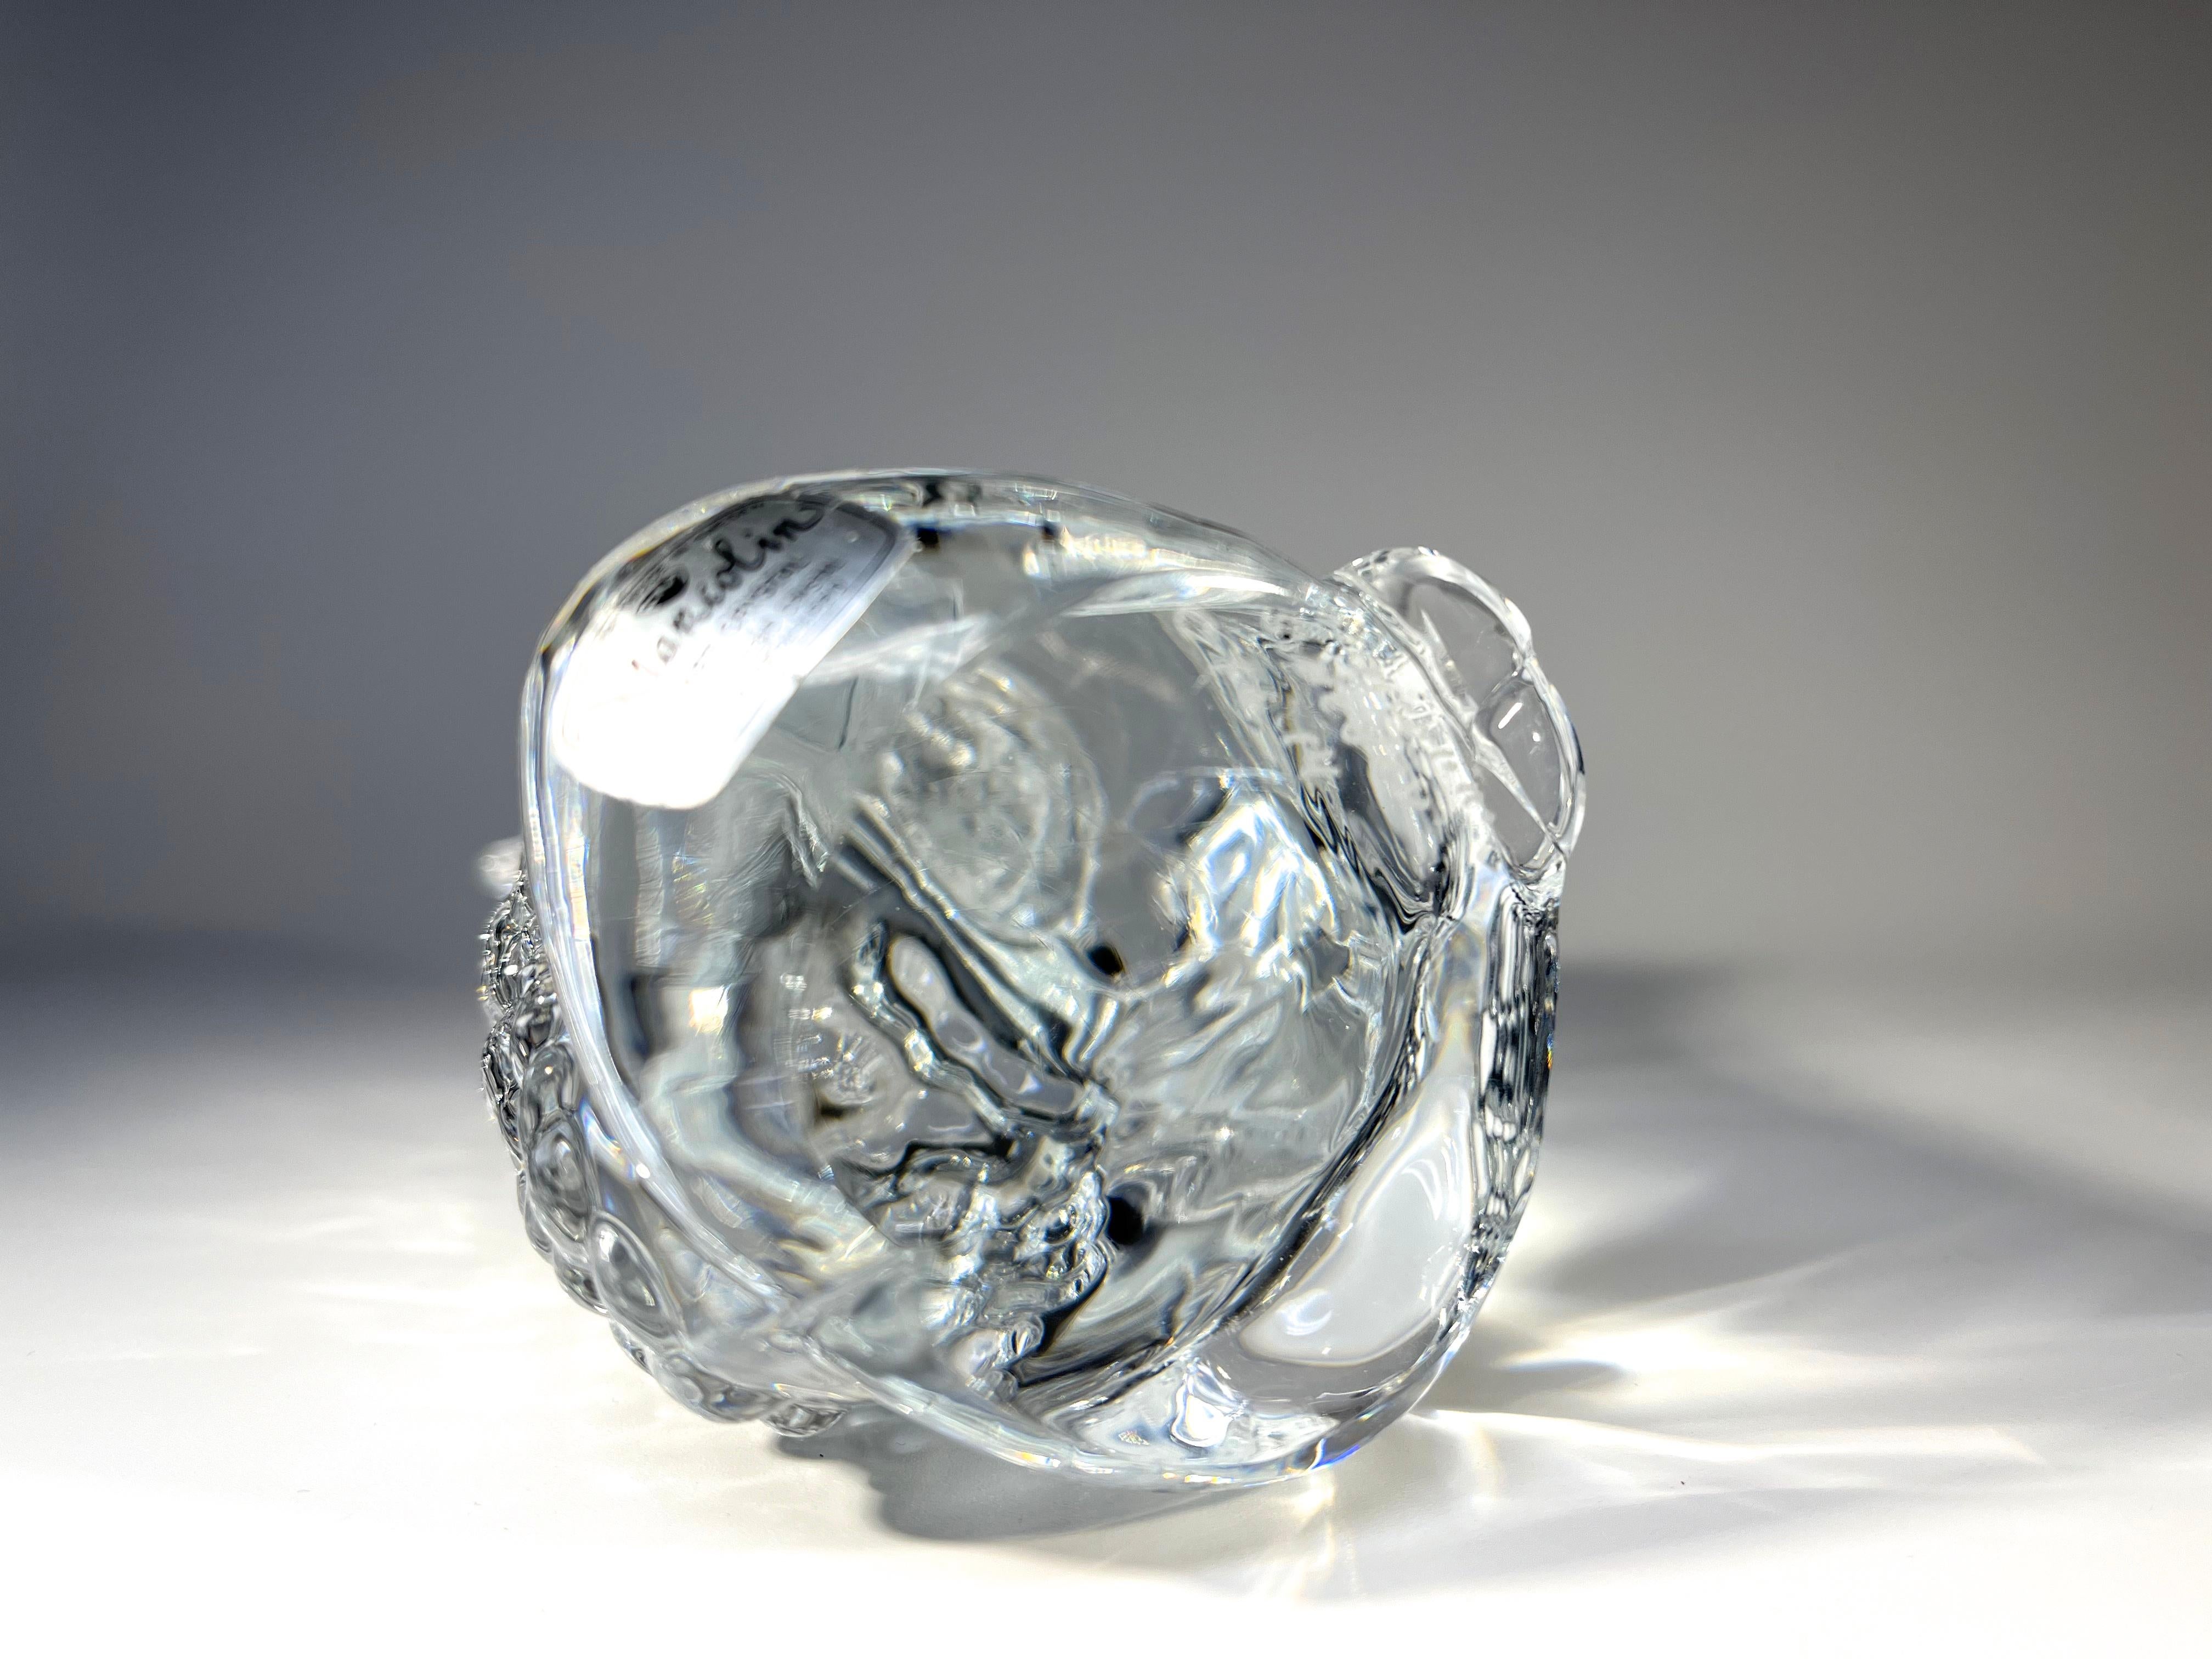 20th Century Handsome Frog Prince Crystal Paperweight By Marcolin Art Crystal Sweden c1988-91 For Sale